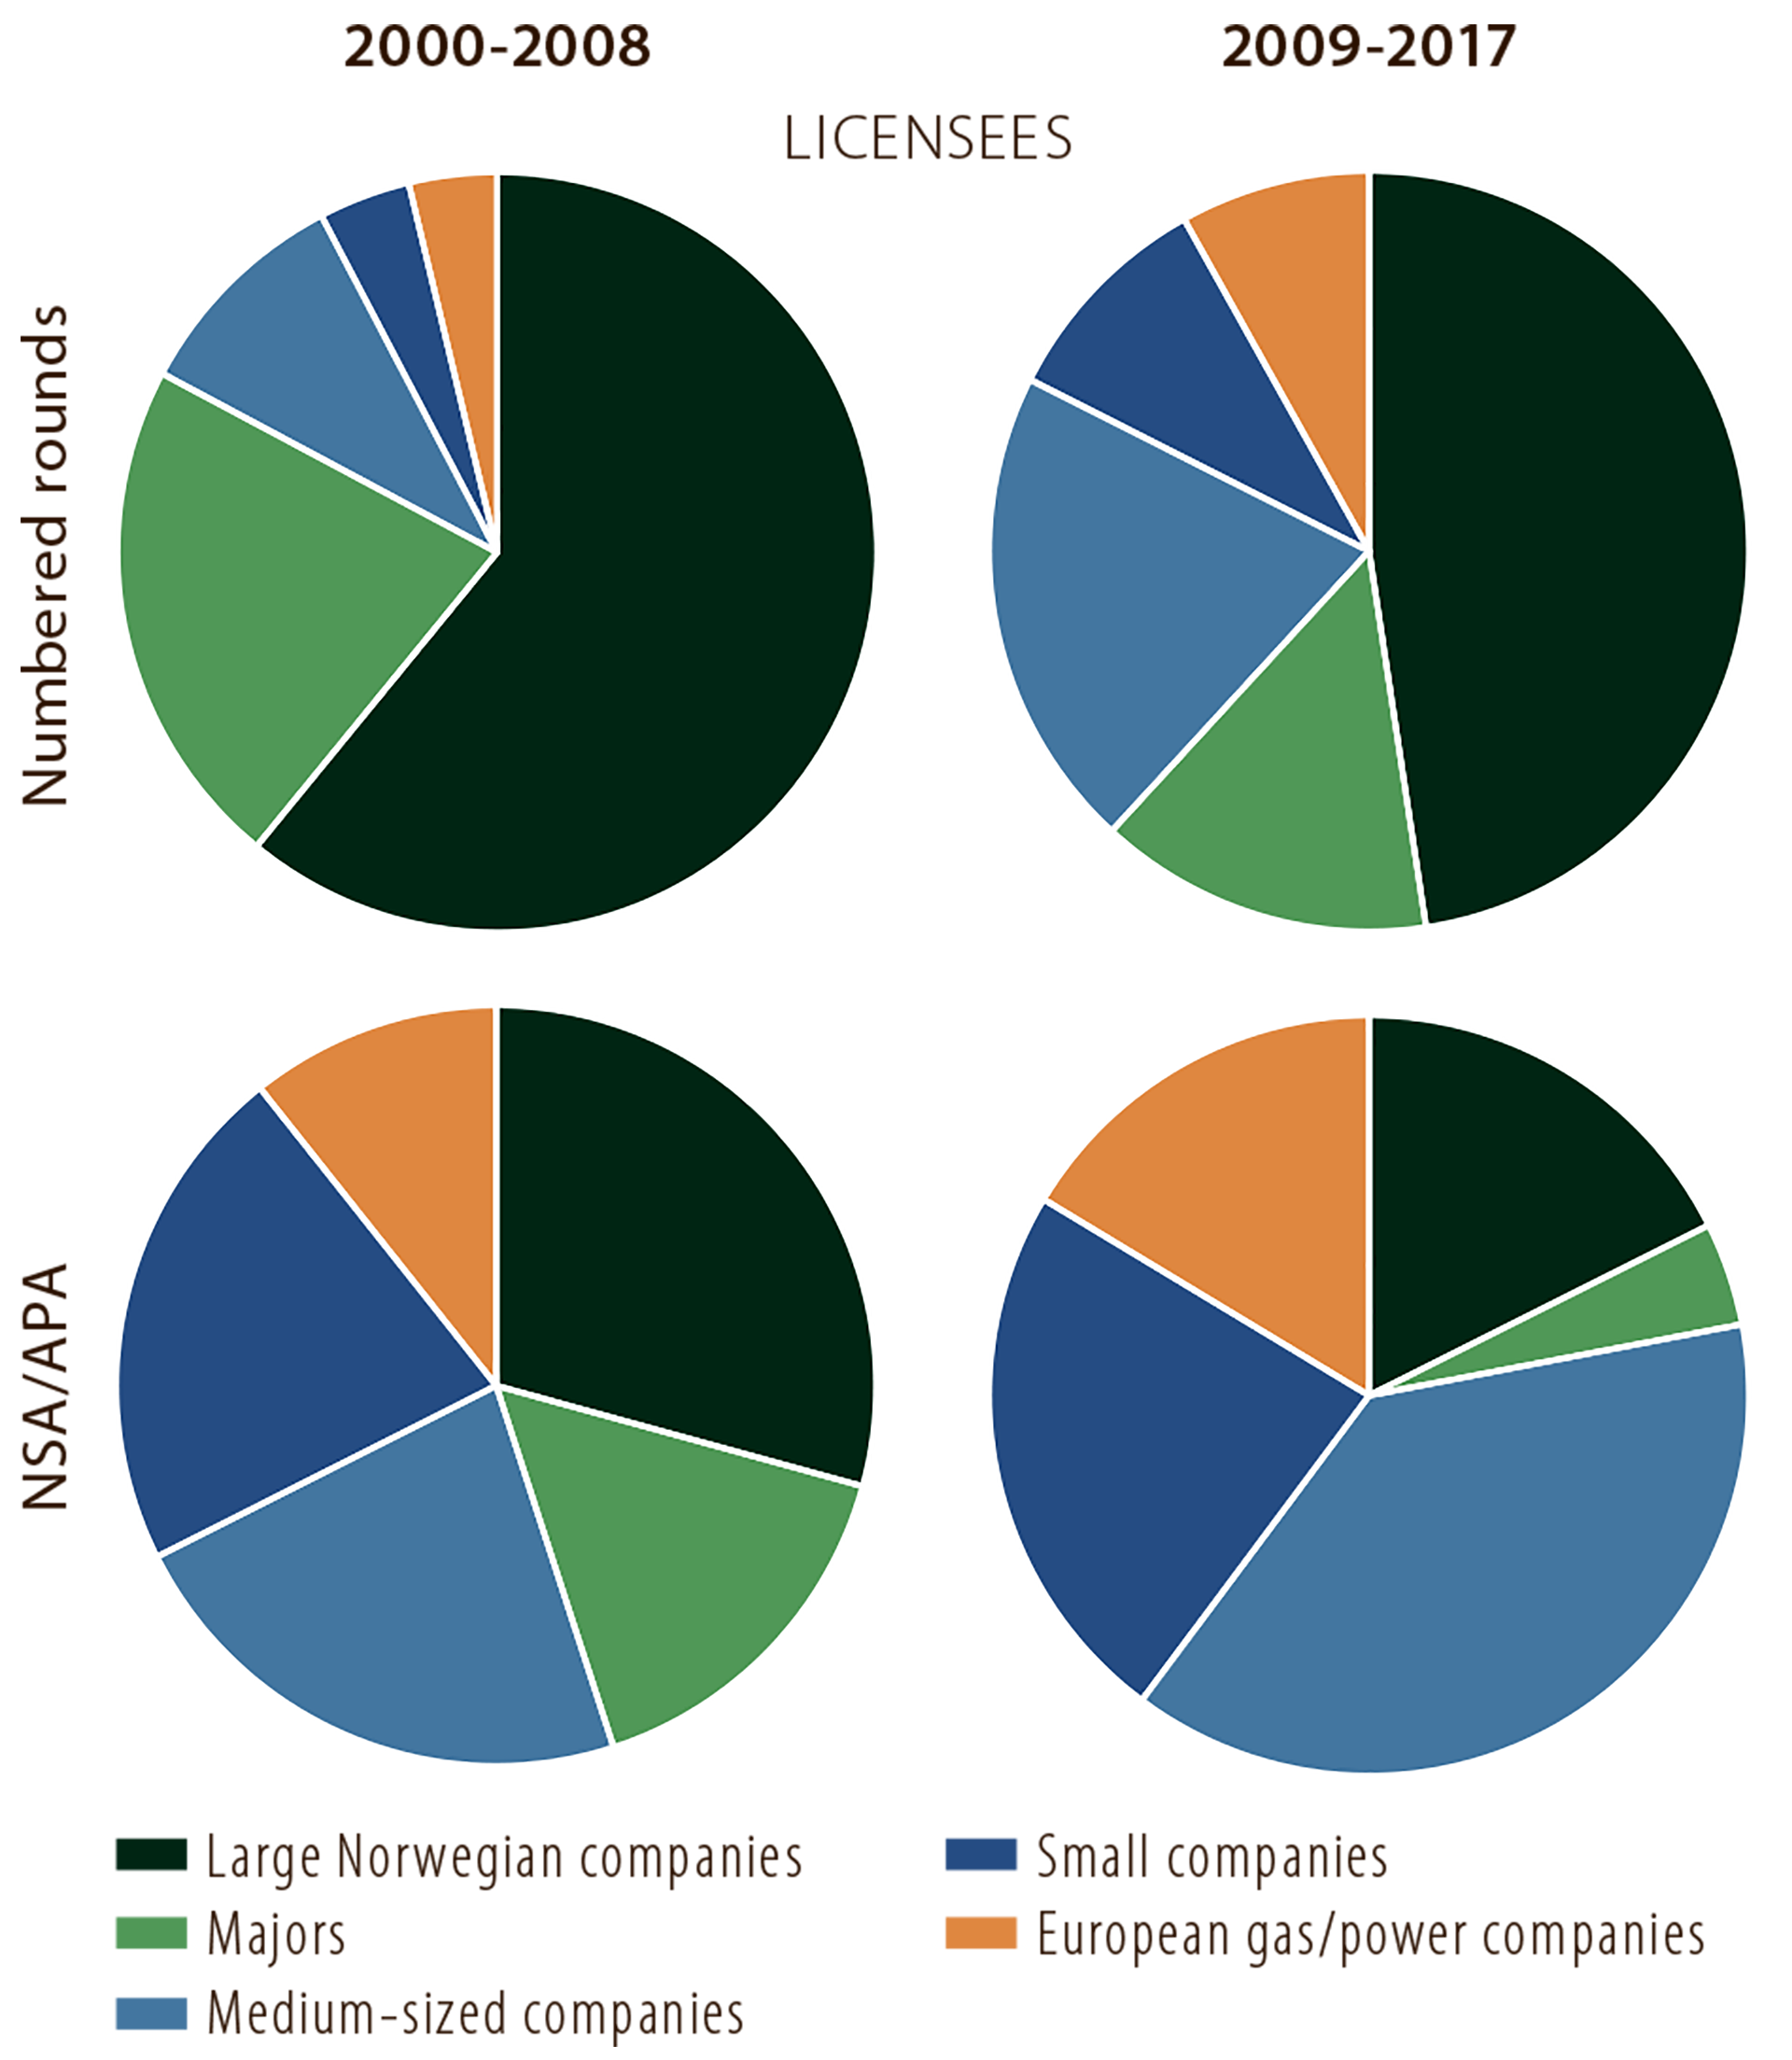 Figure 5.8 Proportion of wildcats drilled by company category (licensees) in licences awarded through numbered and APA rounds respectively in 2000-08 and 2009-17.